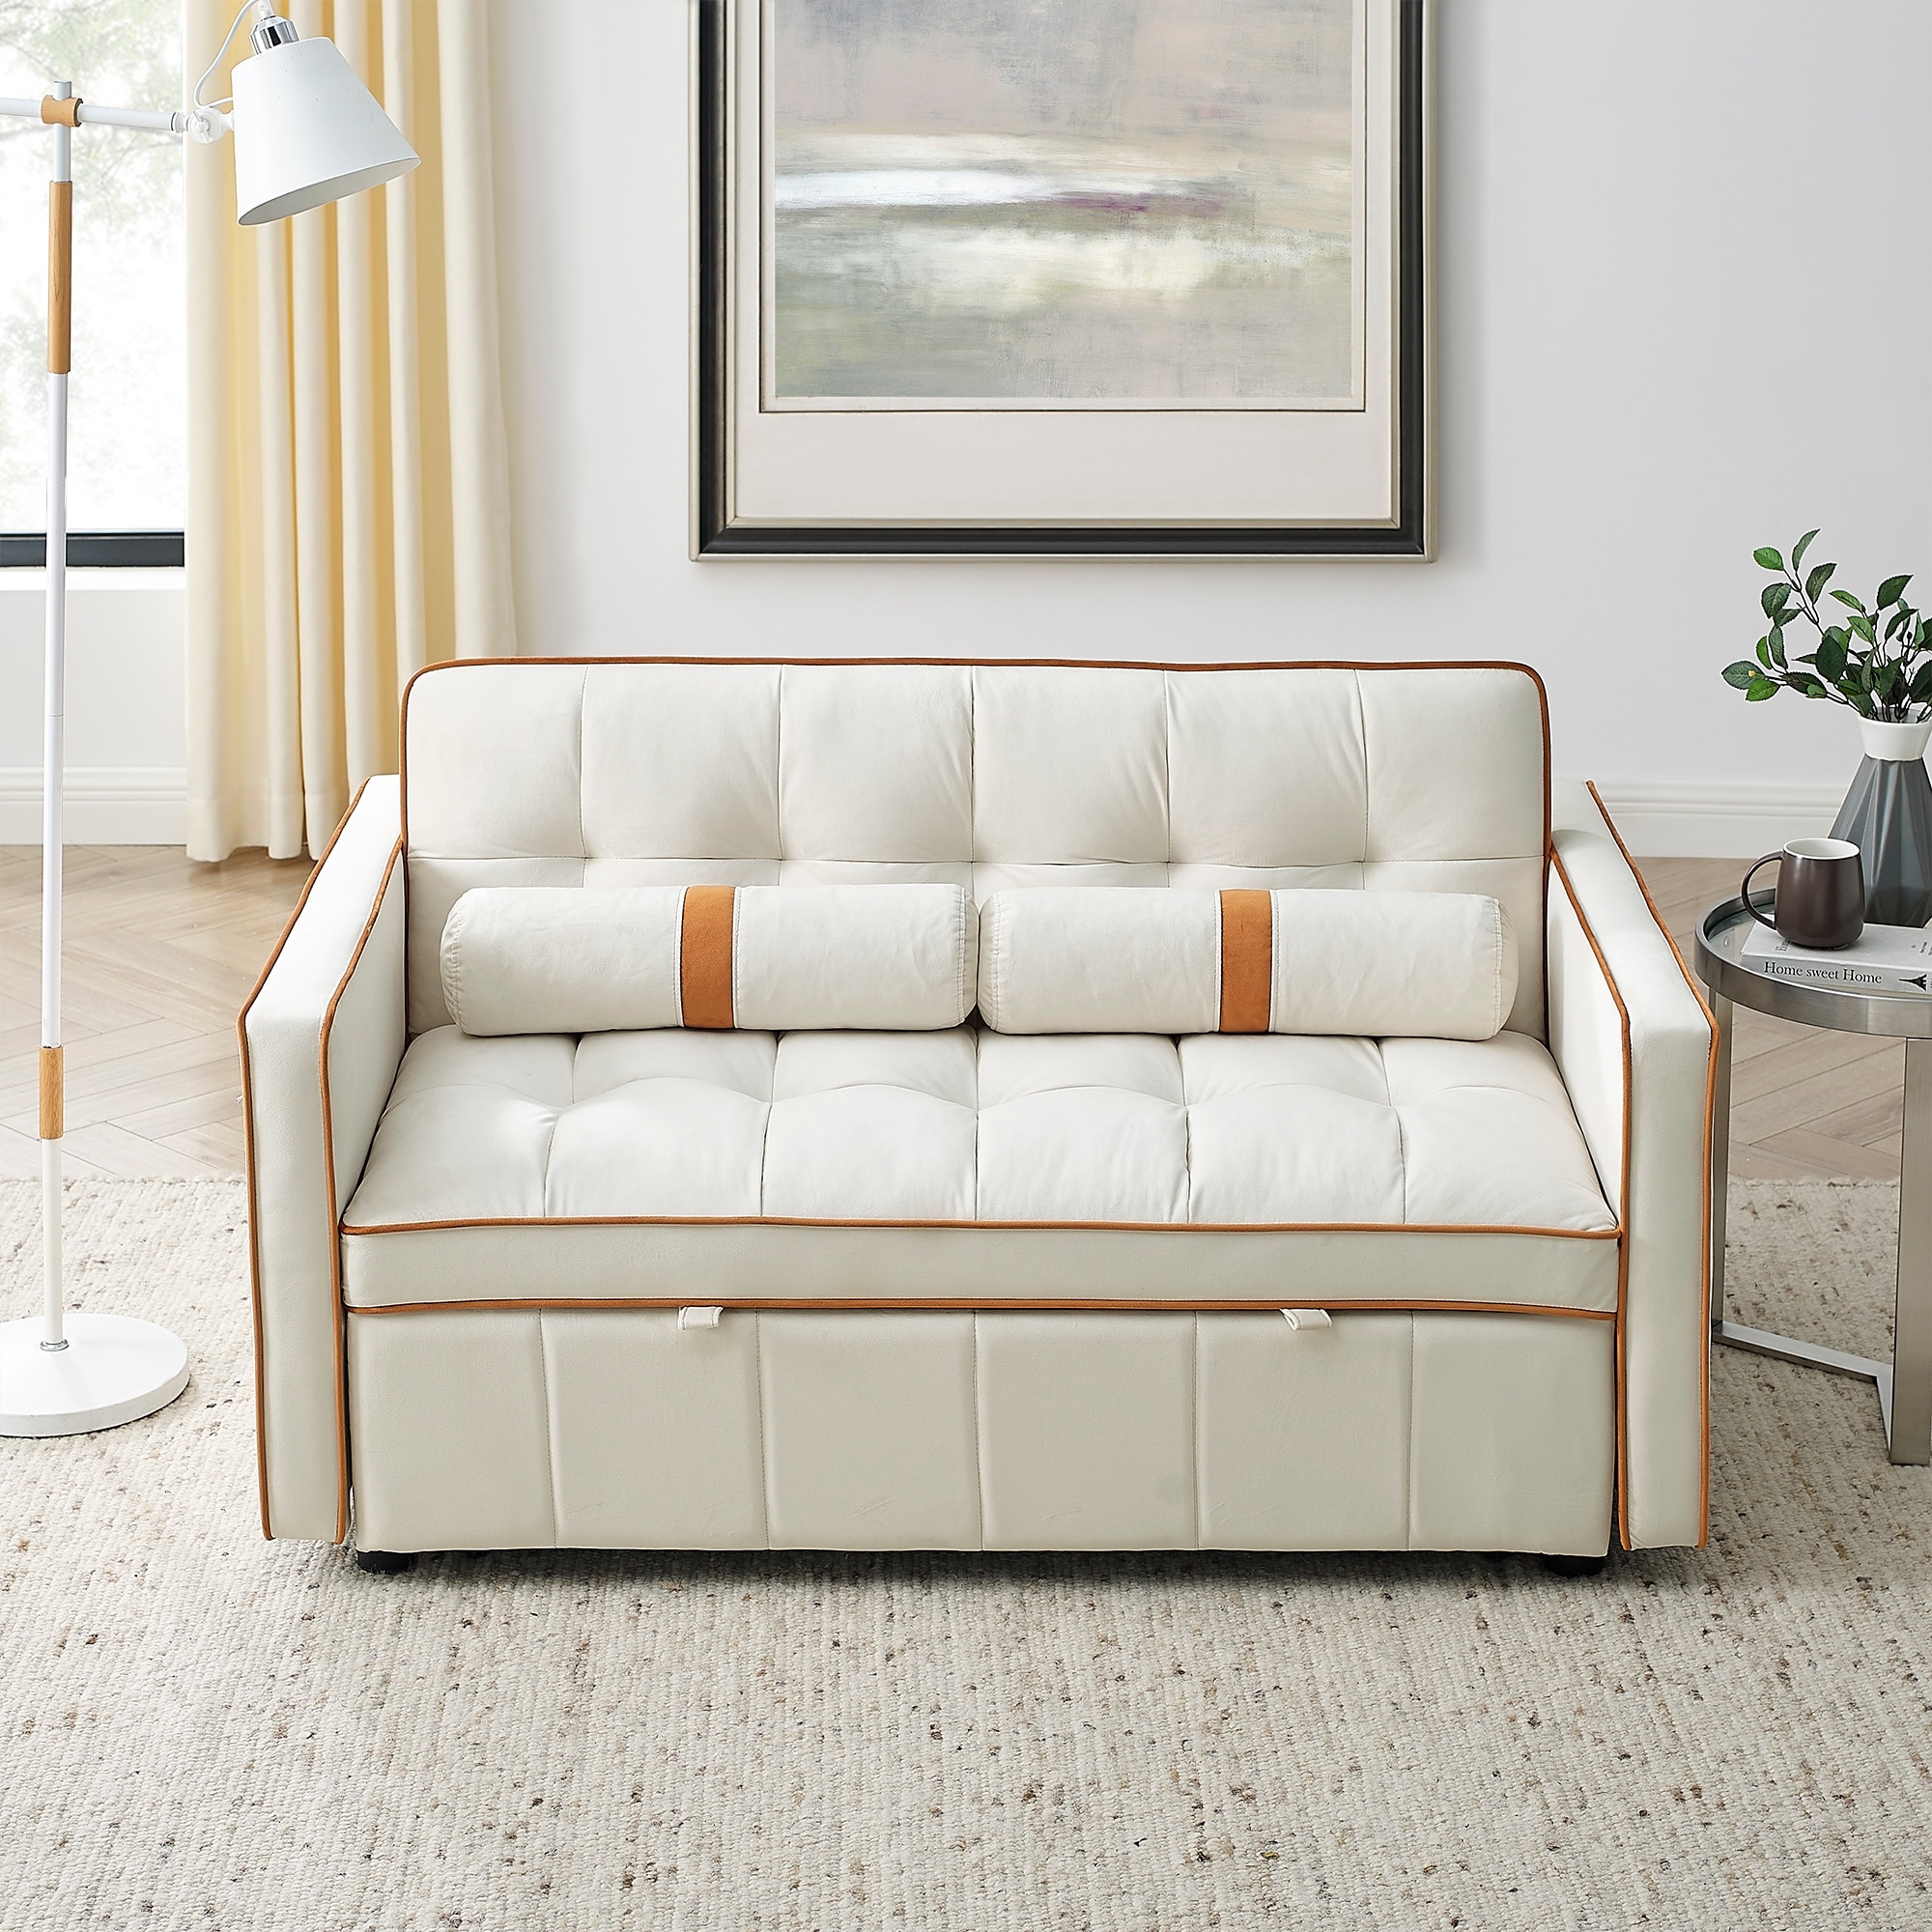 55.5 Pull Out Sofa Bed, 2 Seater Loveseats Sofa Couch with side pockets,  Adjsutable Backrest and Lumbar Pillows - On Sale - Bed Bath & Beyond -  38373430